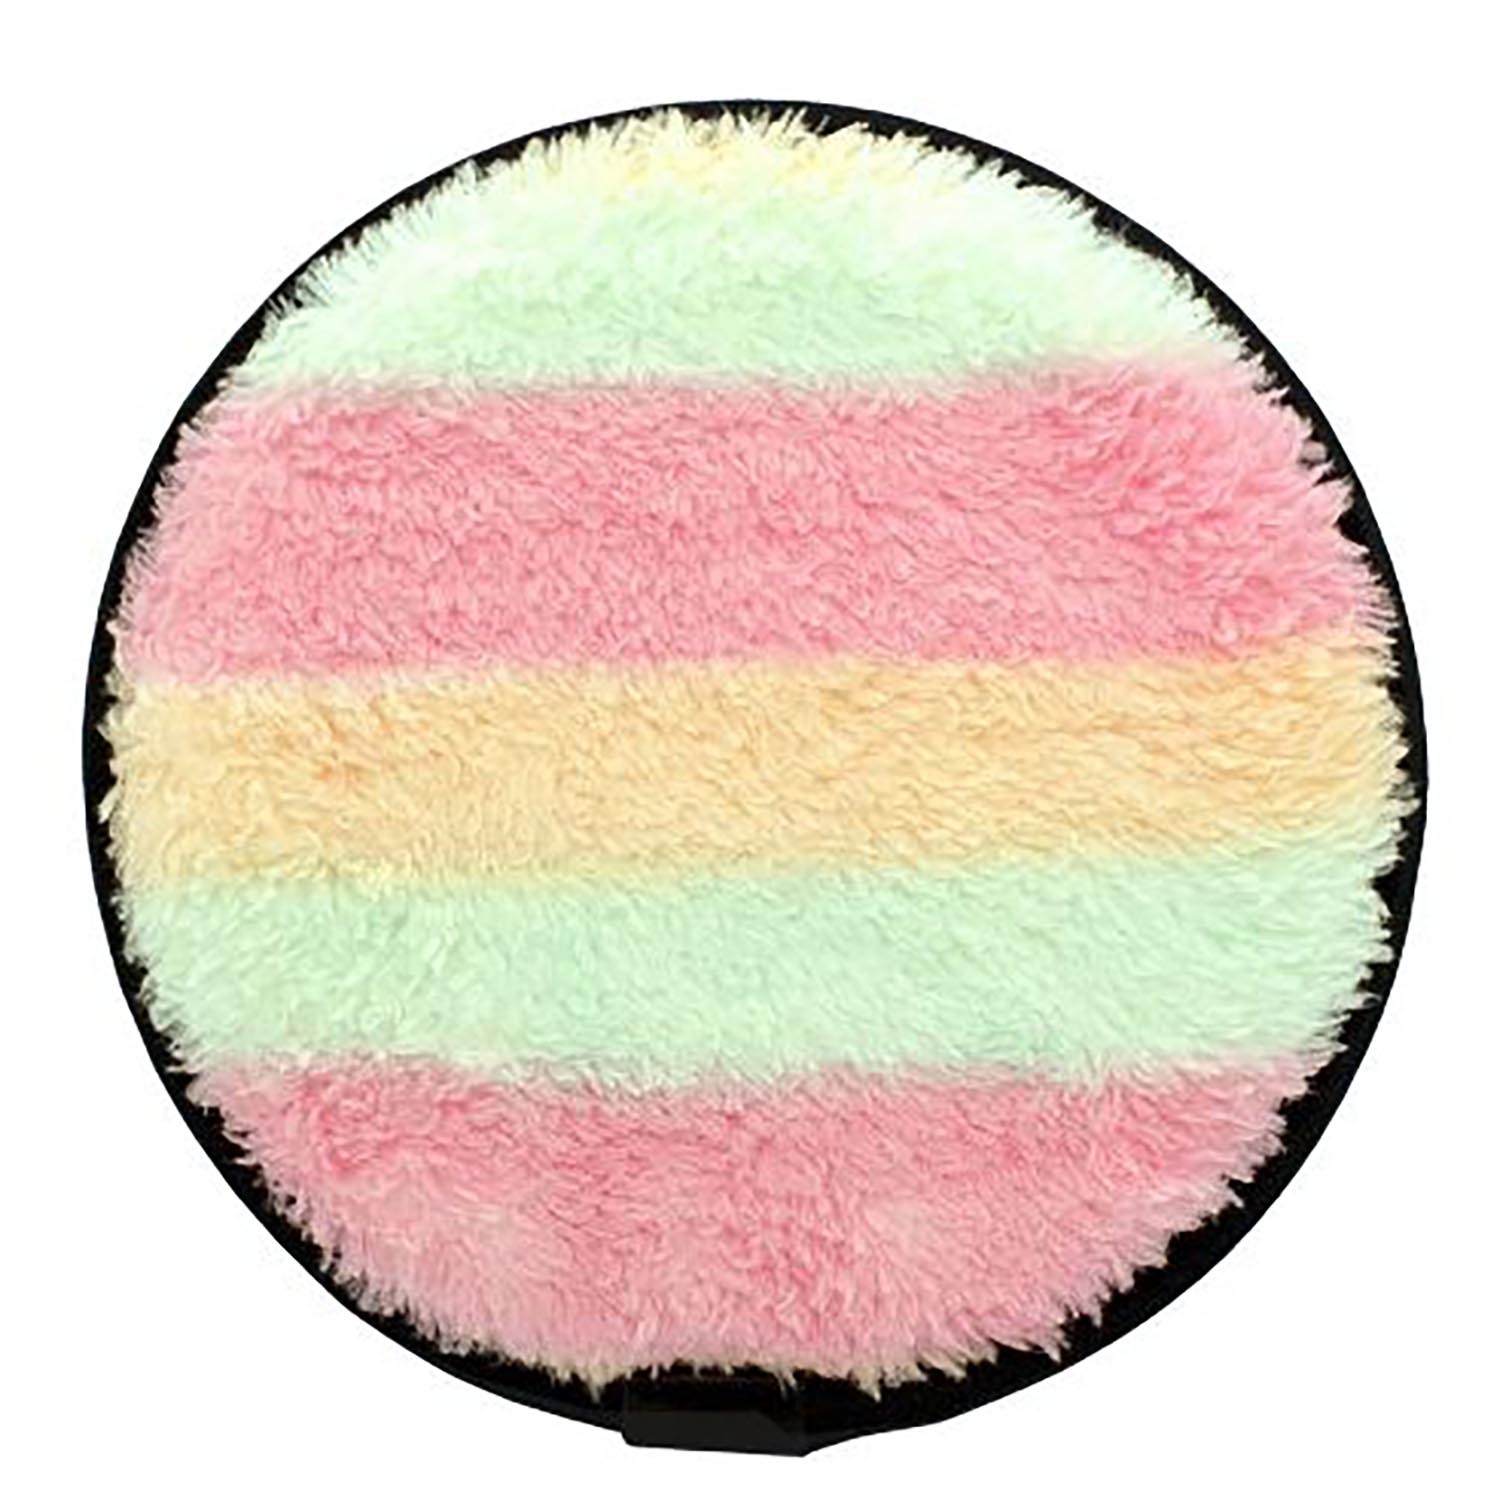 W7 Makeup Remover Cookie Image 2